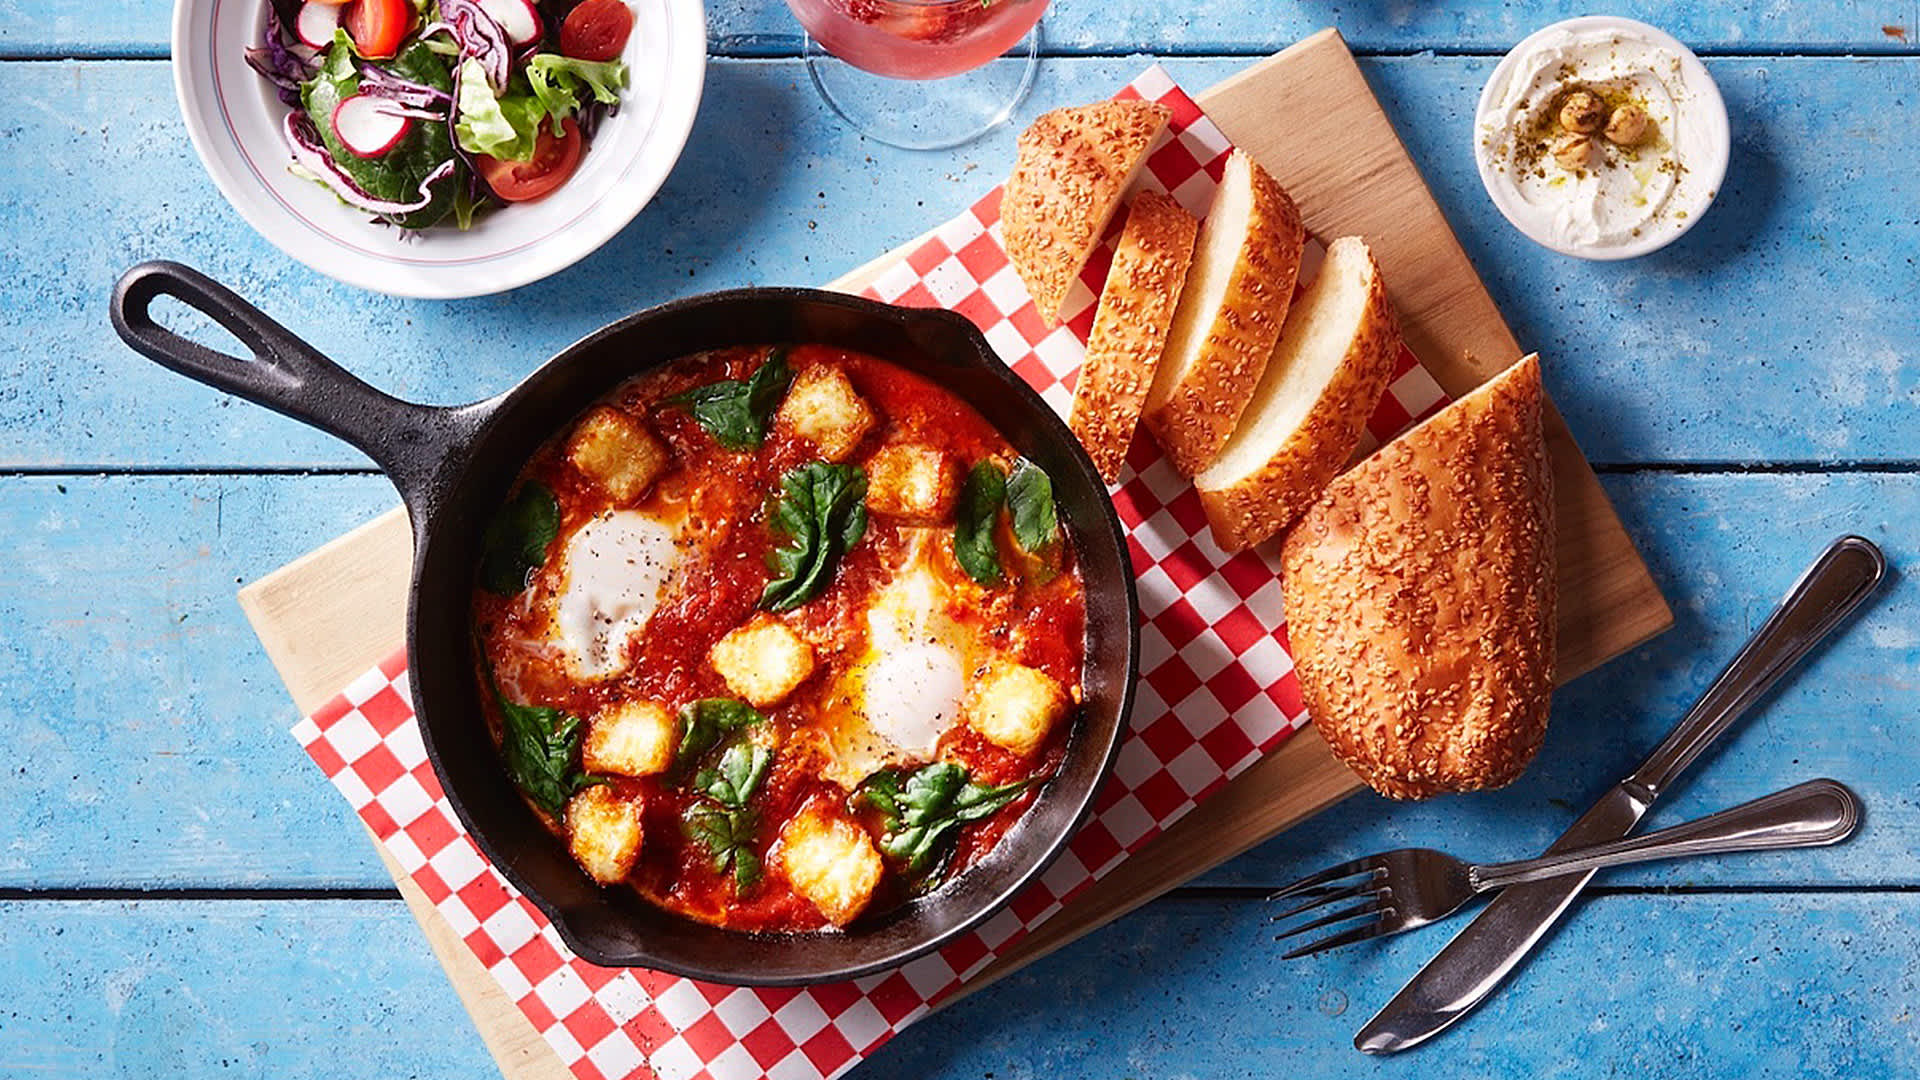 Landwer's classic shakshuka with spinach and deep-fried halloumi cheese. Served with side salad, tahini, and a choice of bread. Served with eggs medium-hard.